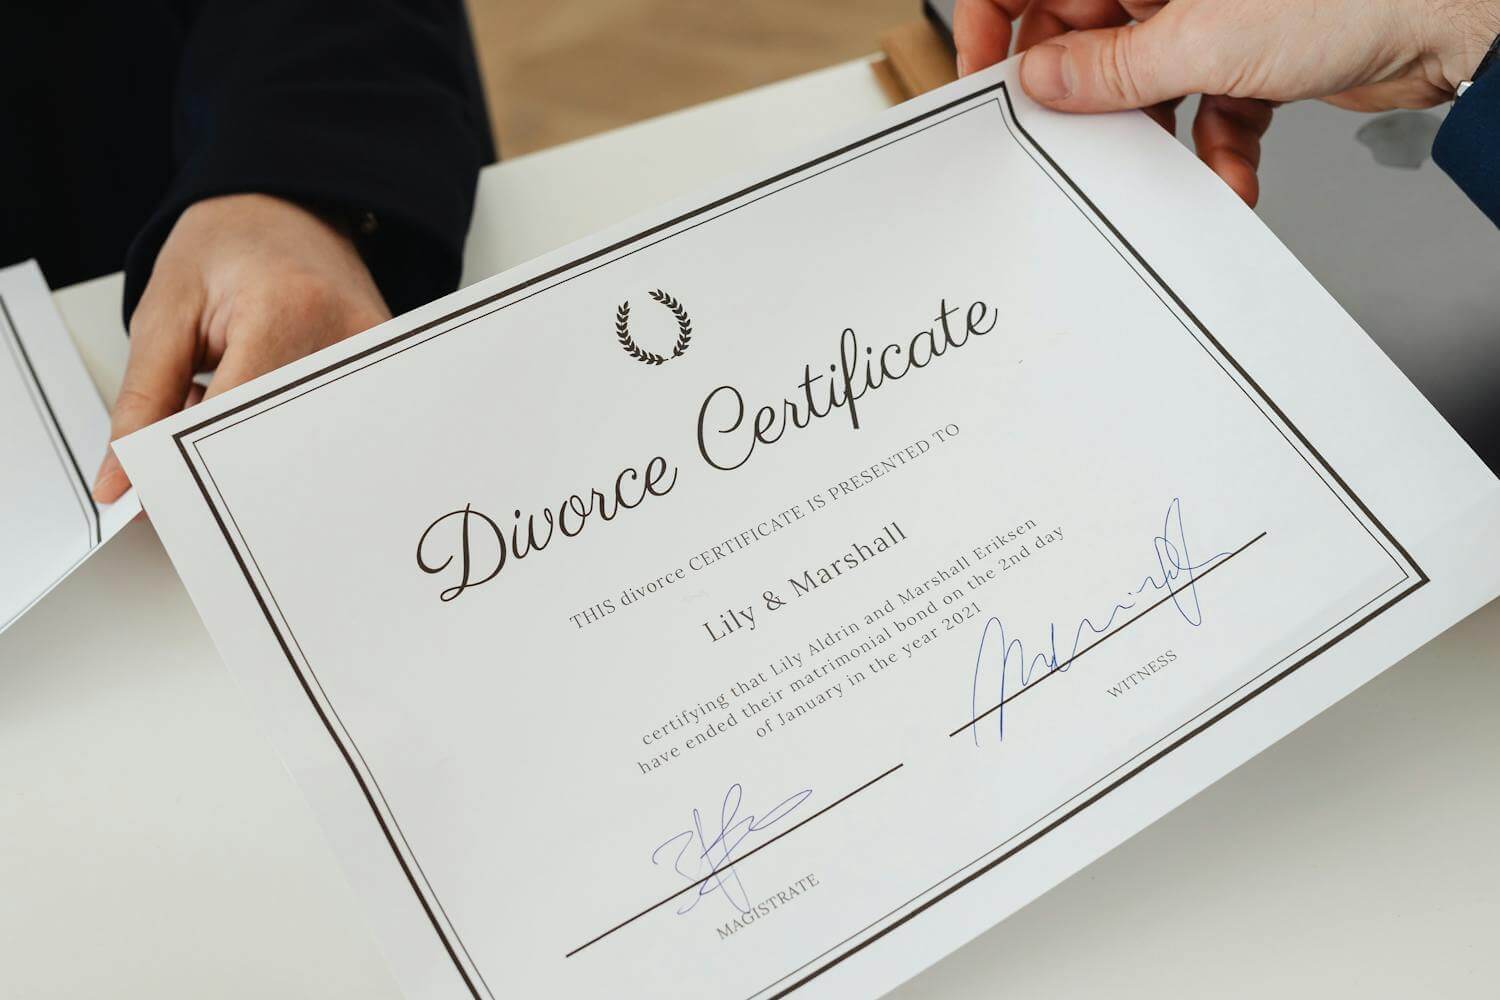 divorce certificate melbourne | Dandenong Family Lawyers